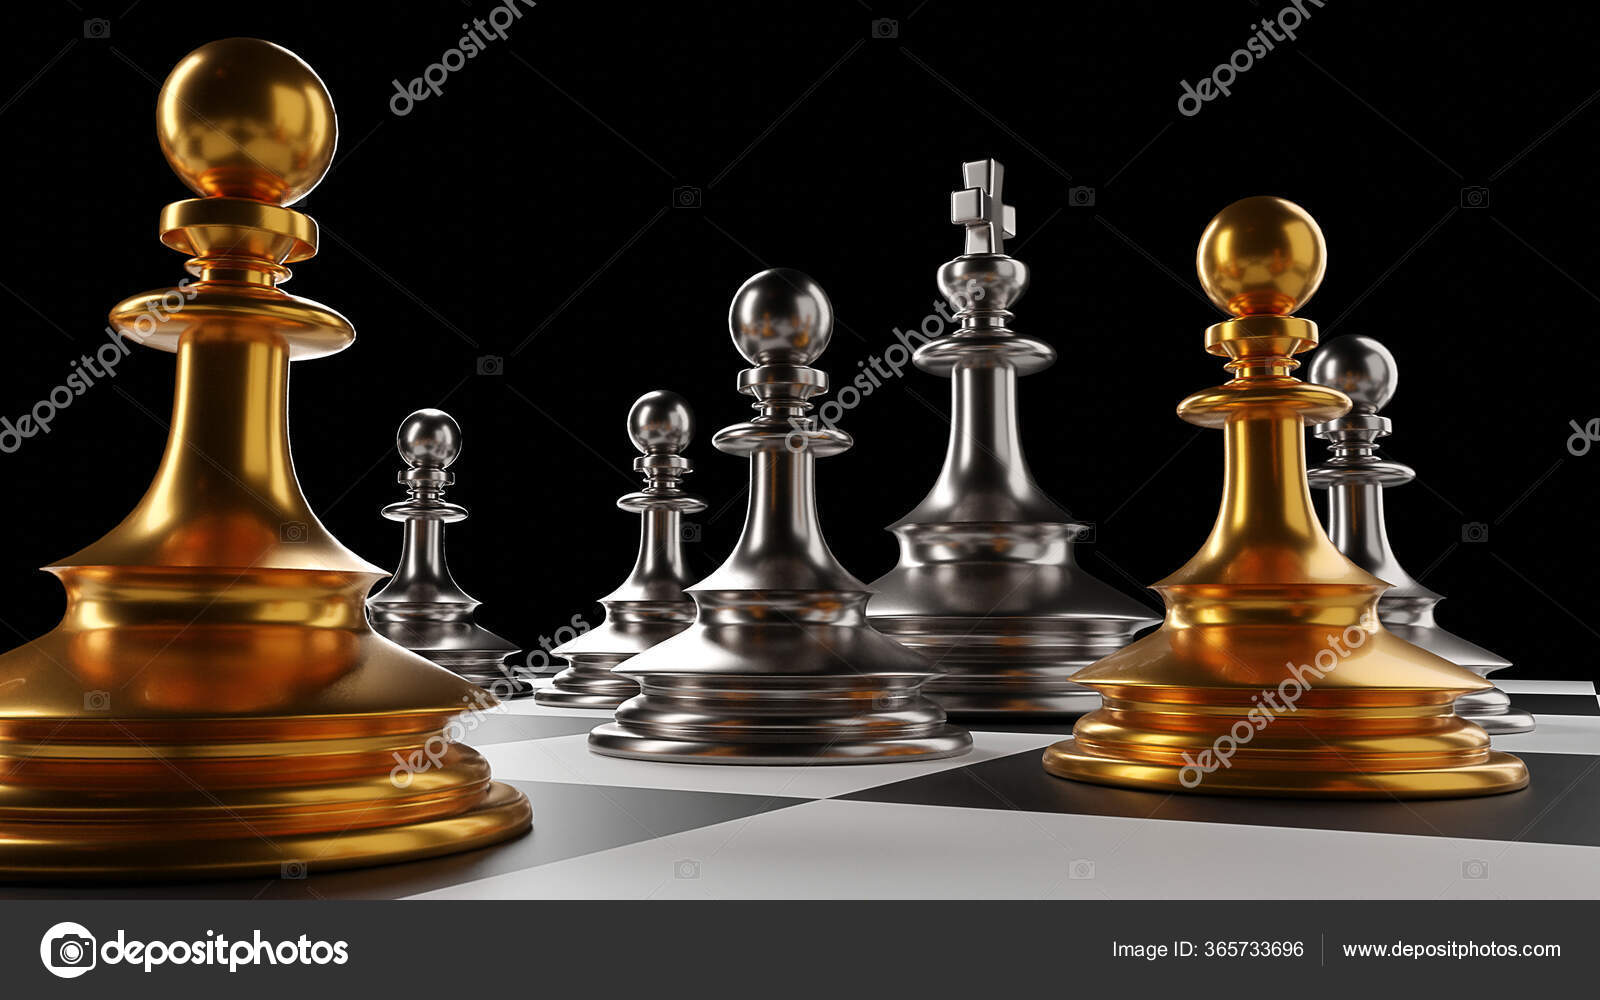 The King in battle chess game stand on chessboard with black